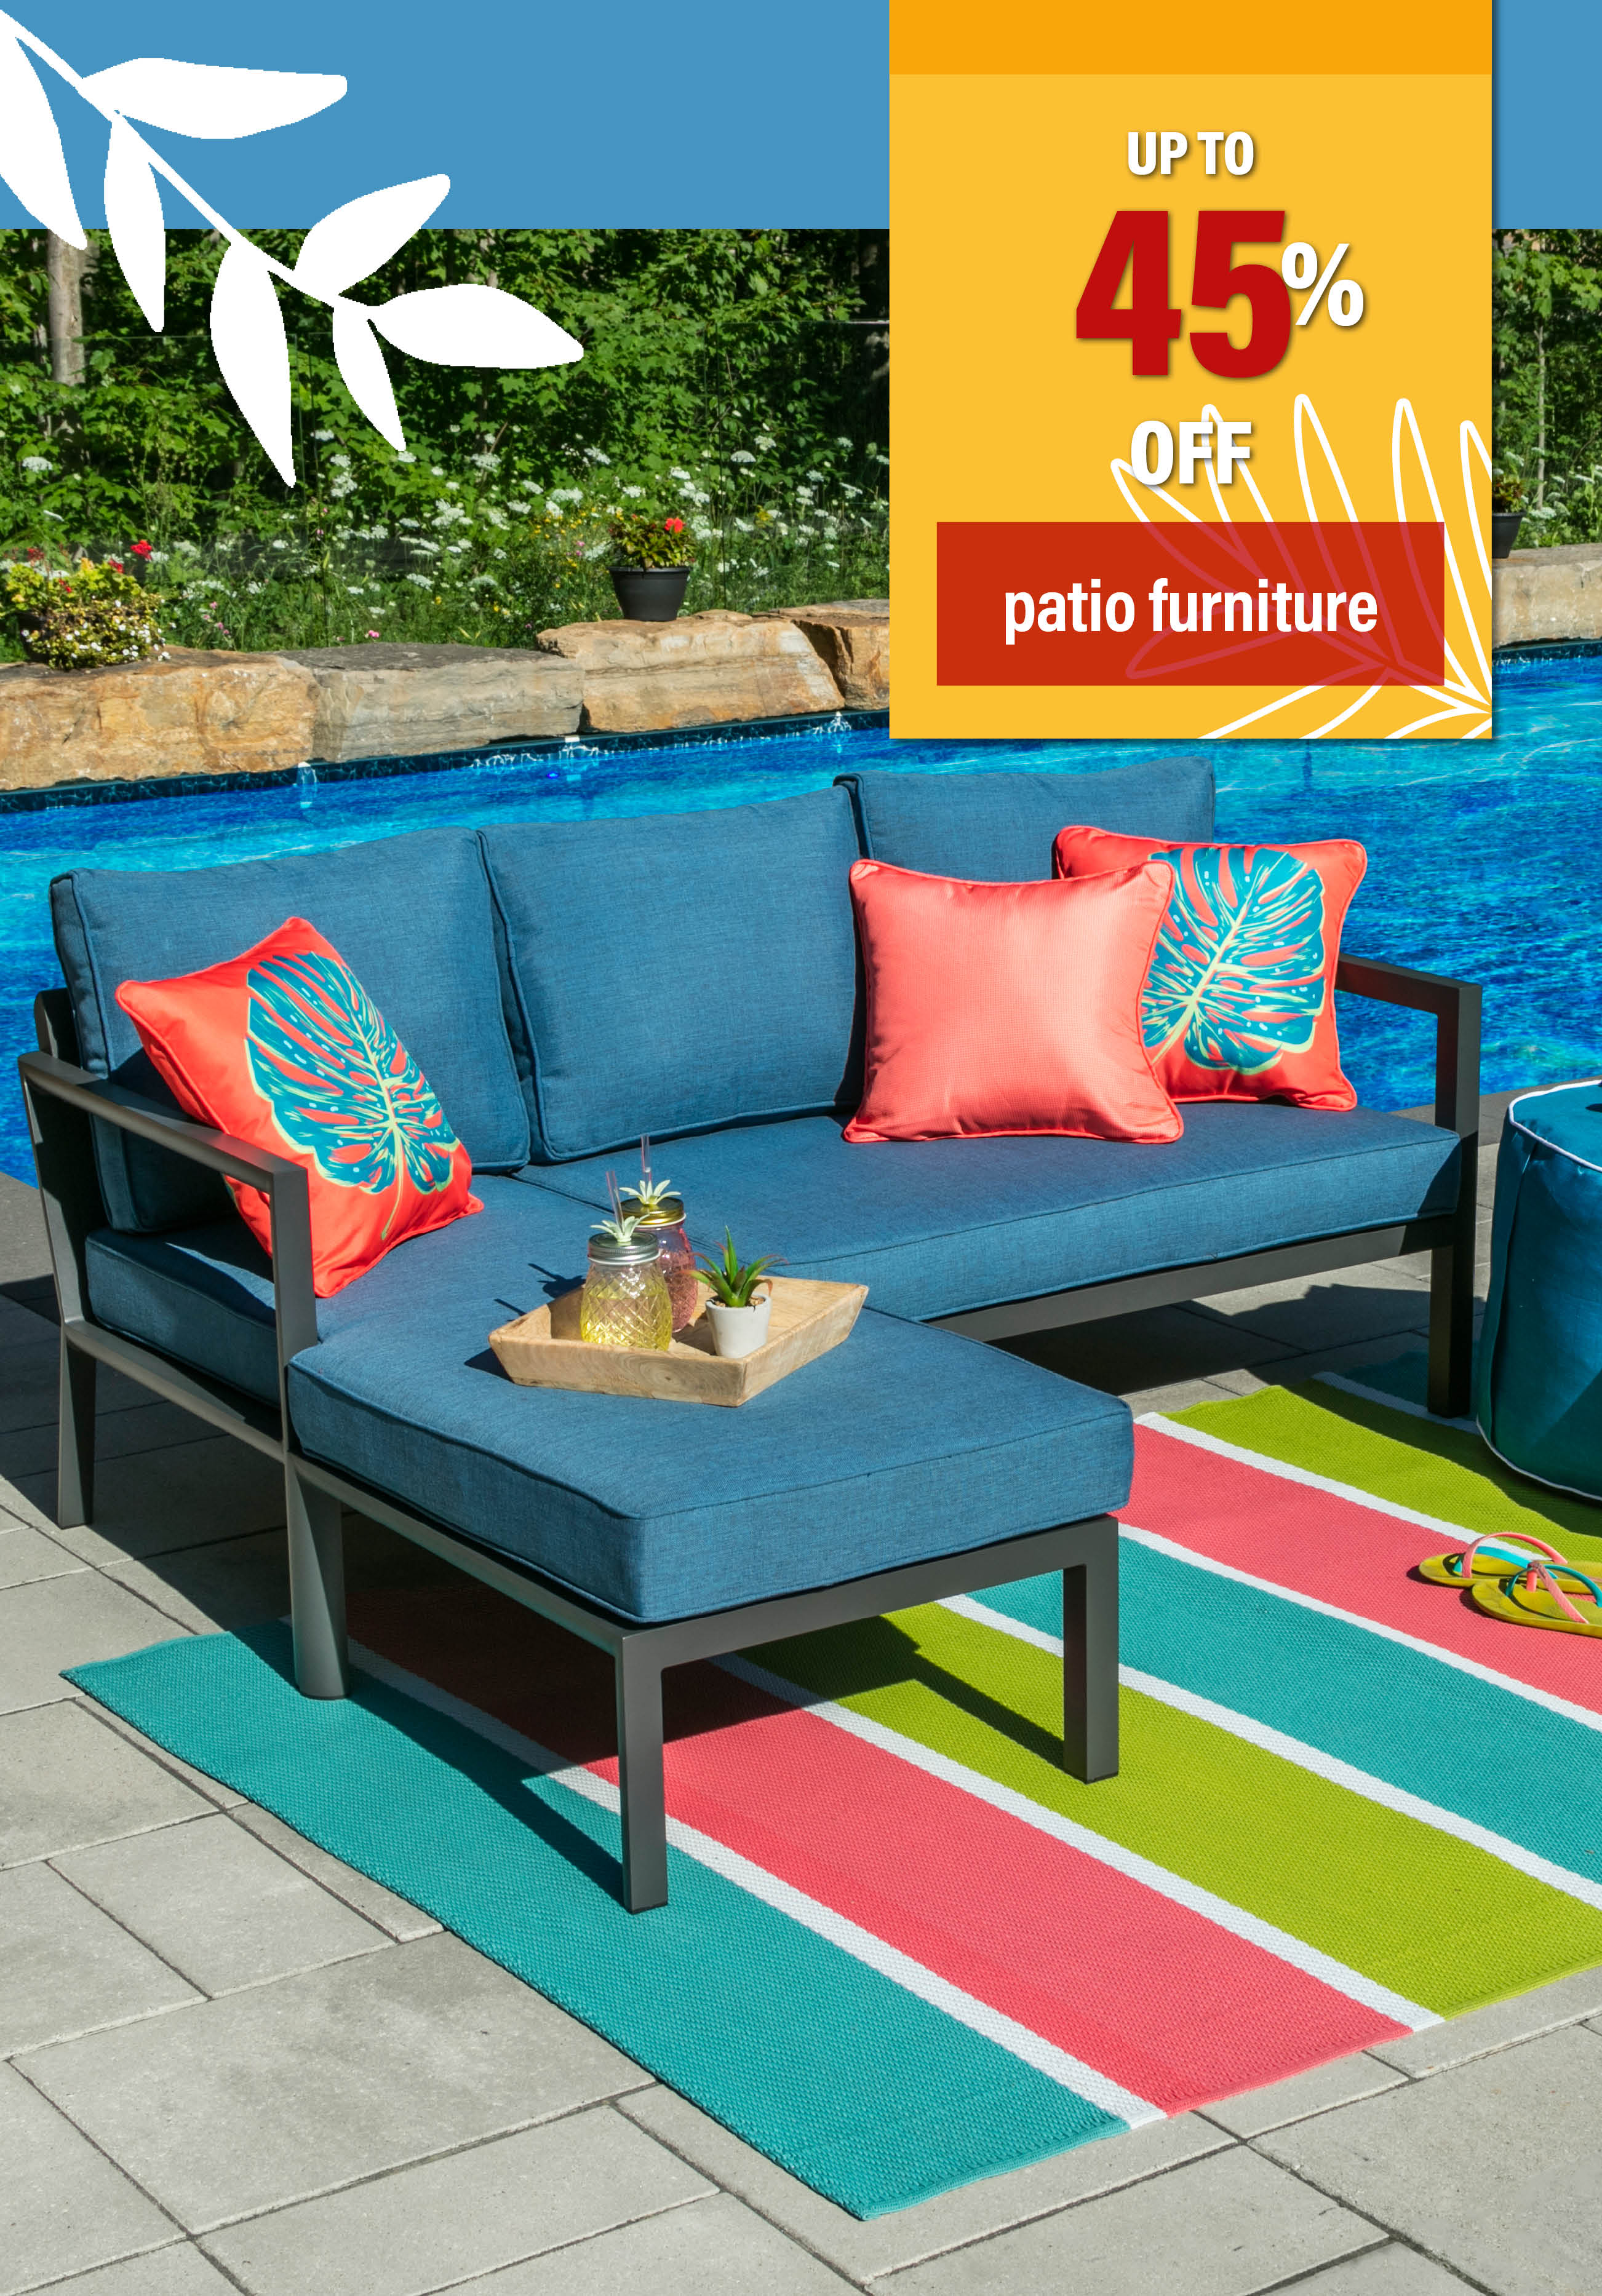 Up to 45% off patio furniture